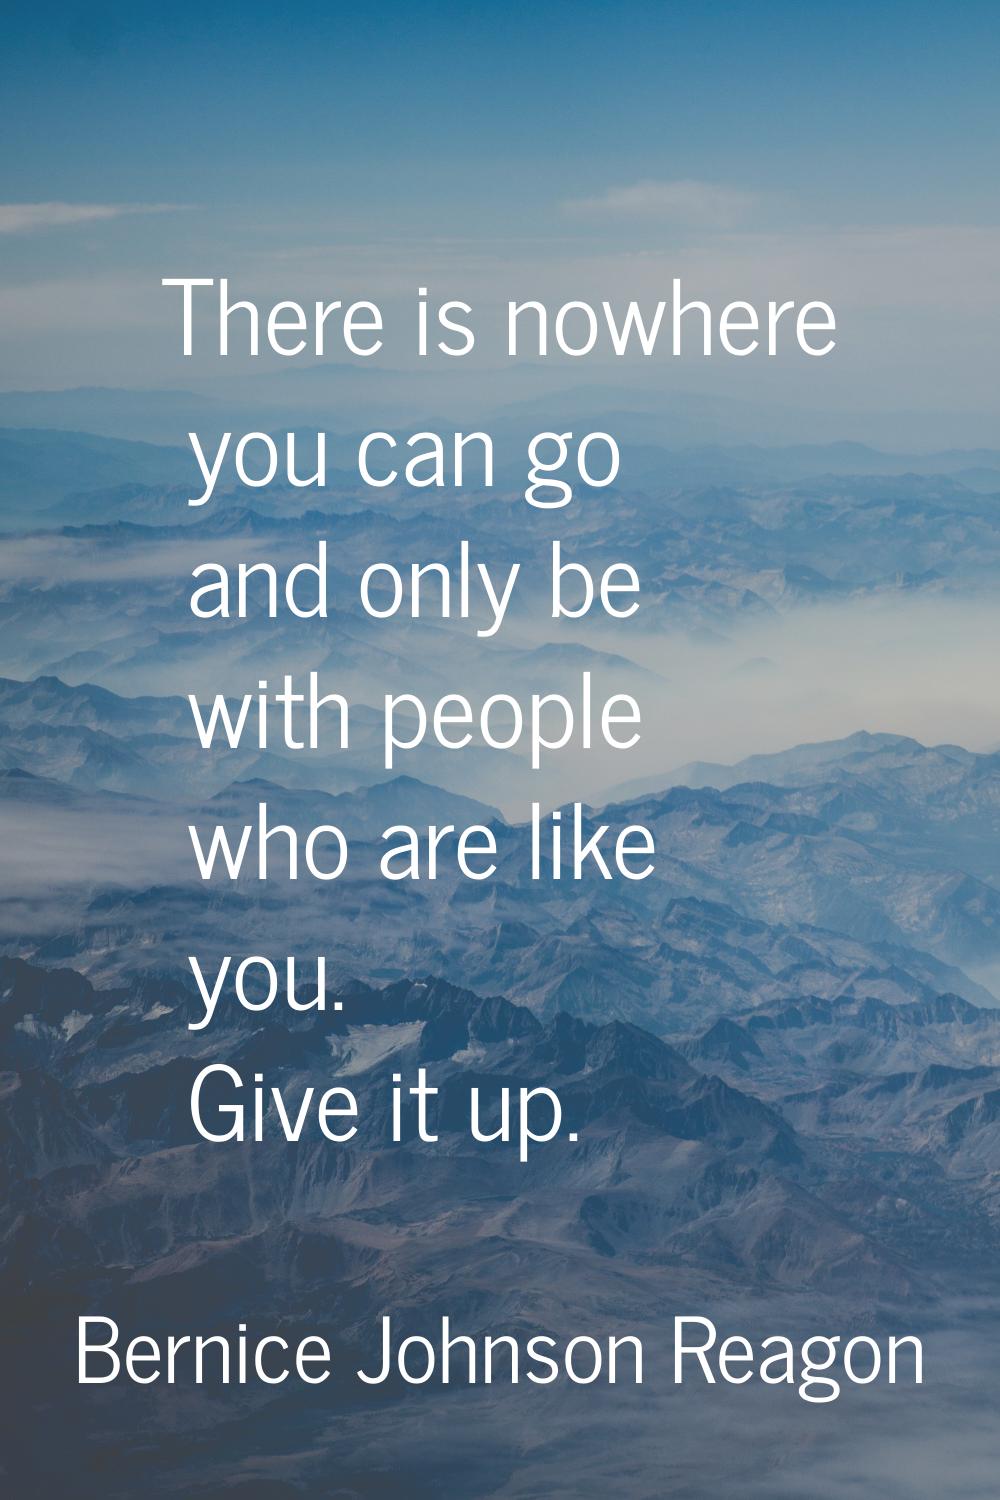 There is nowhere you can go and only be with people who are like you. Give it up.